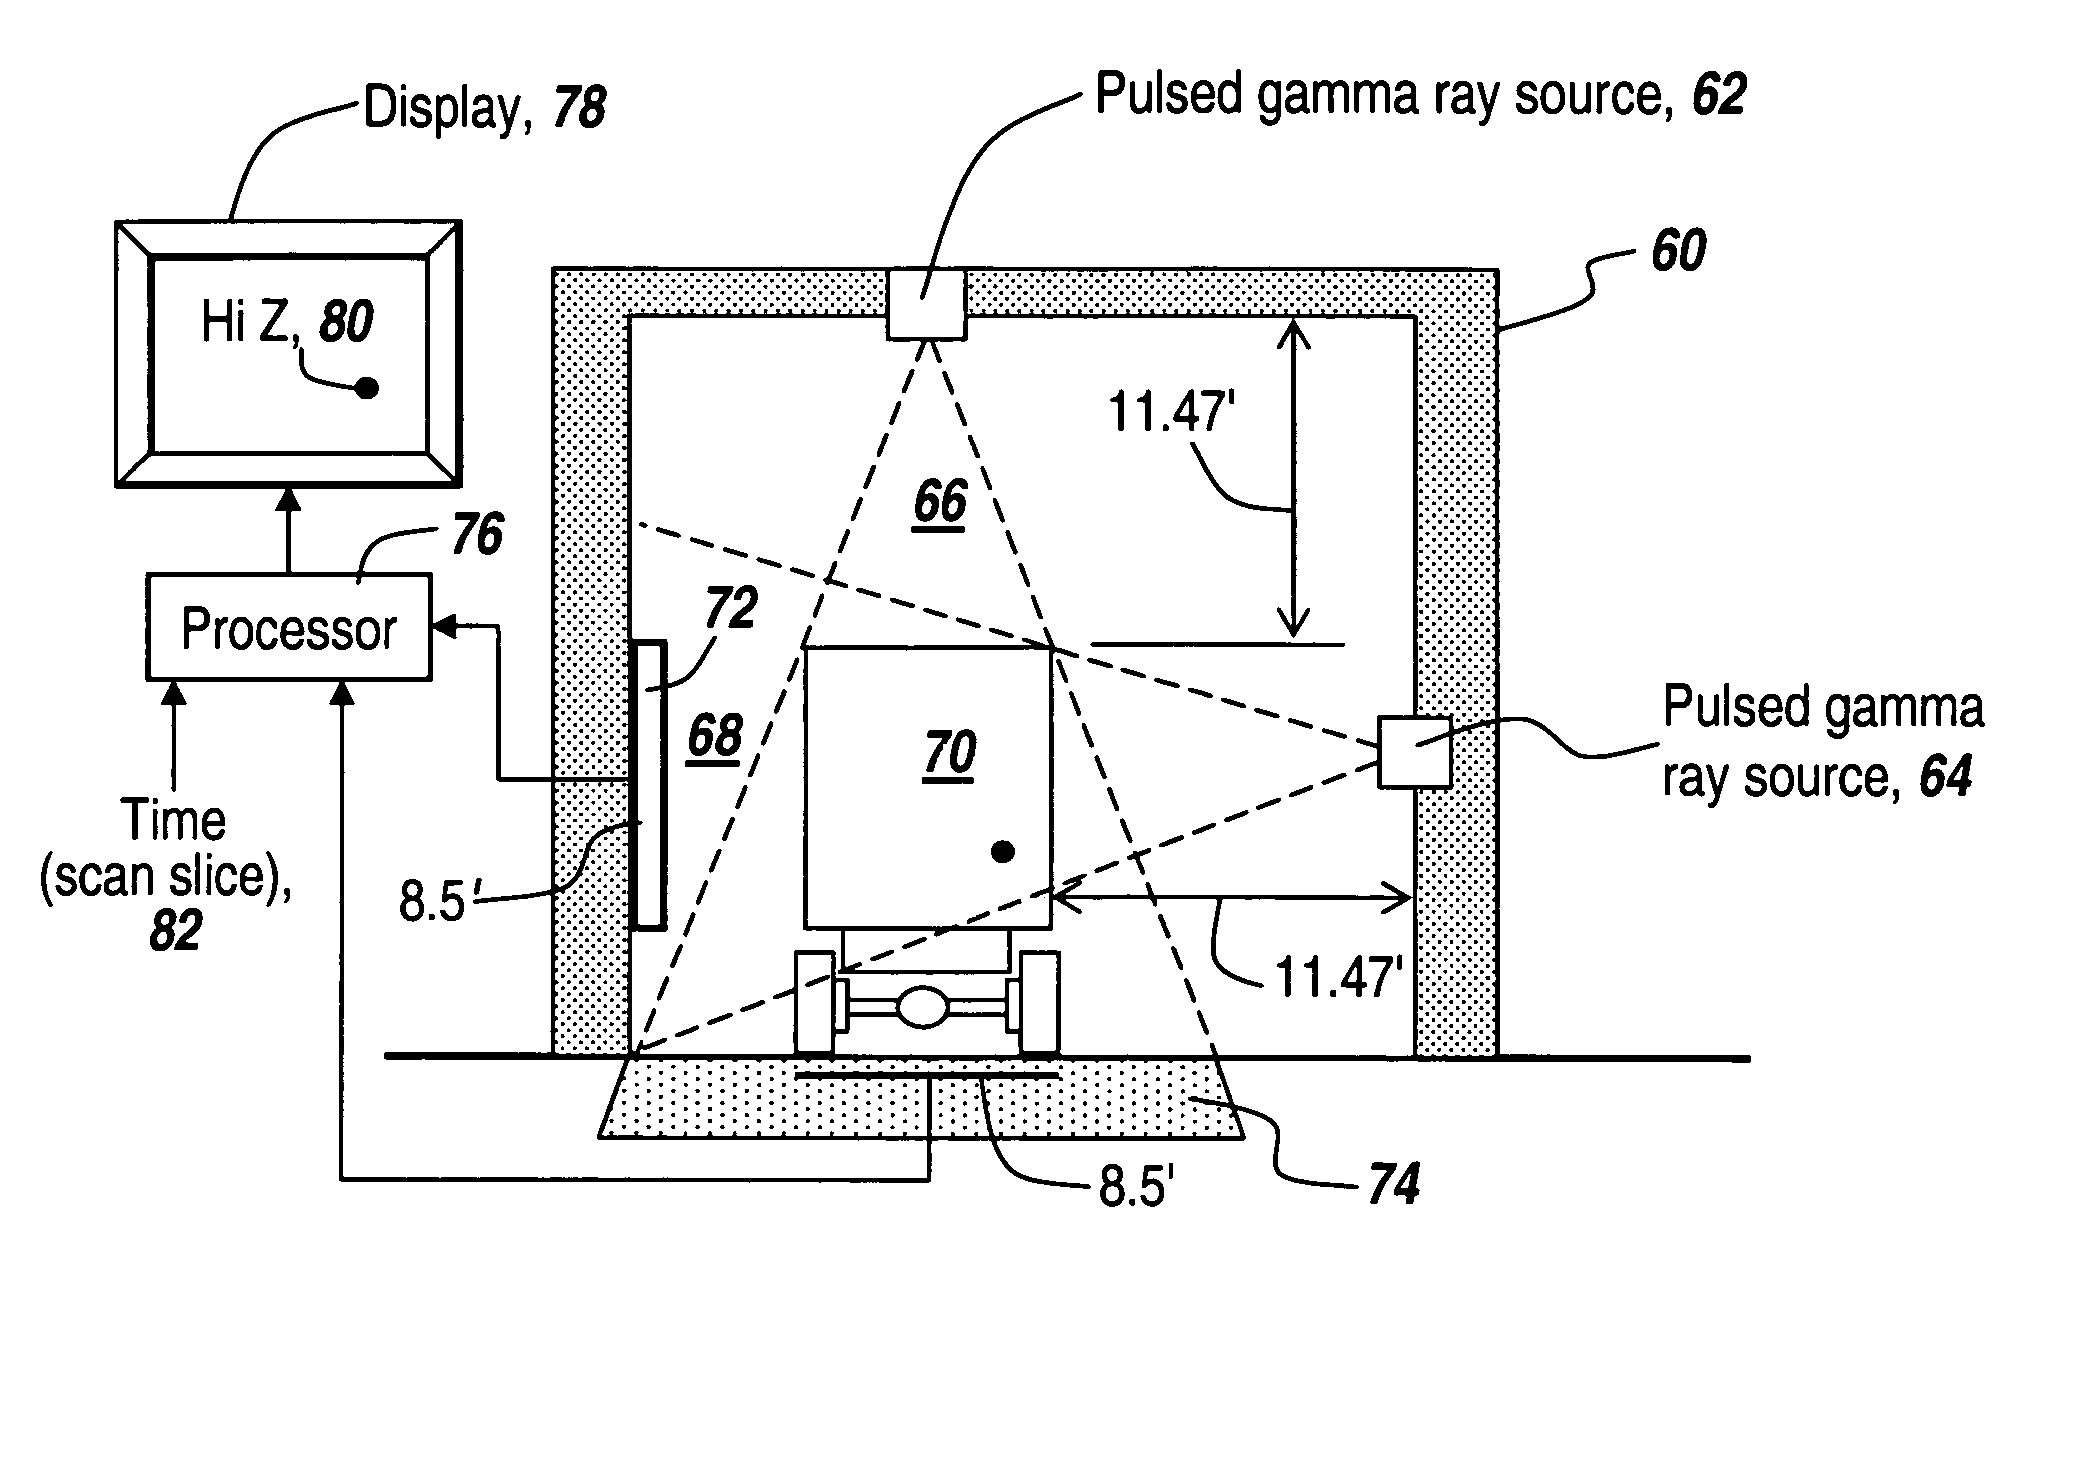 Method and apparatus for the safe and rapid detection of nuclear devices within containers